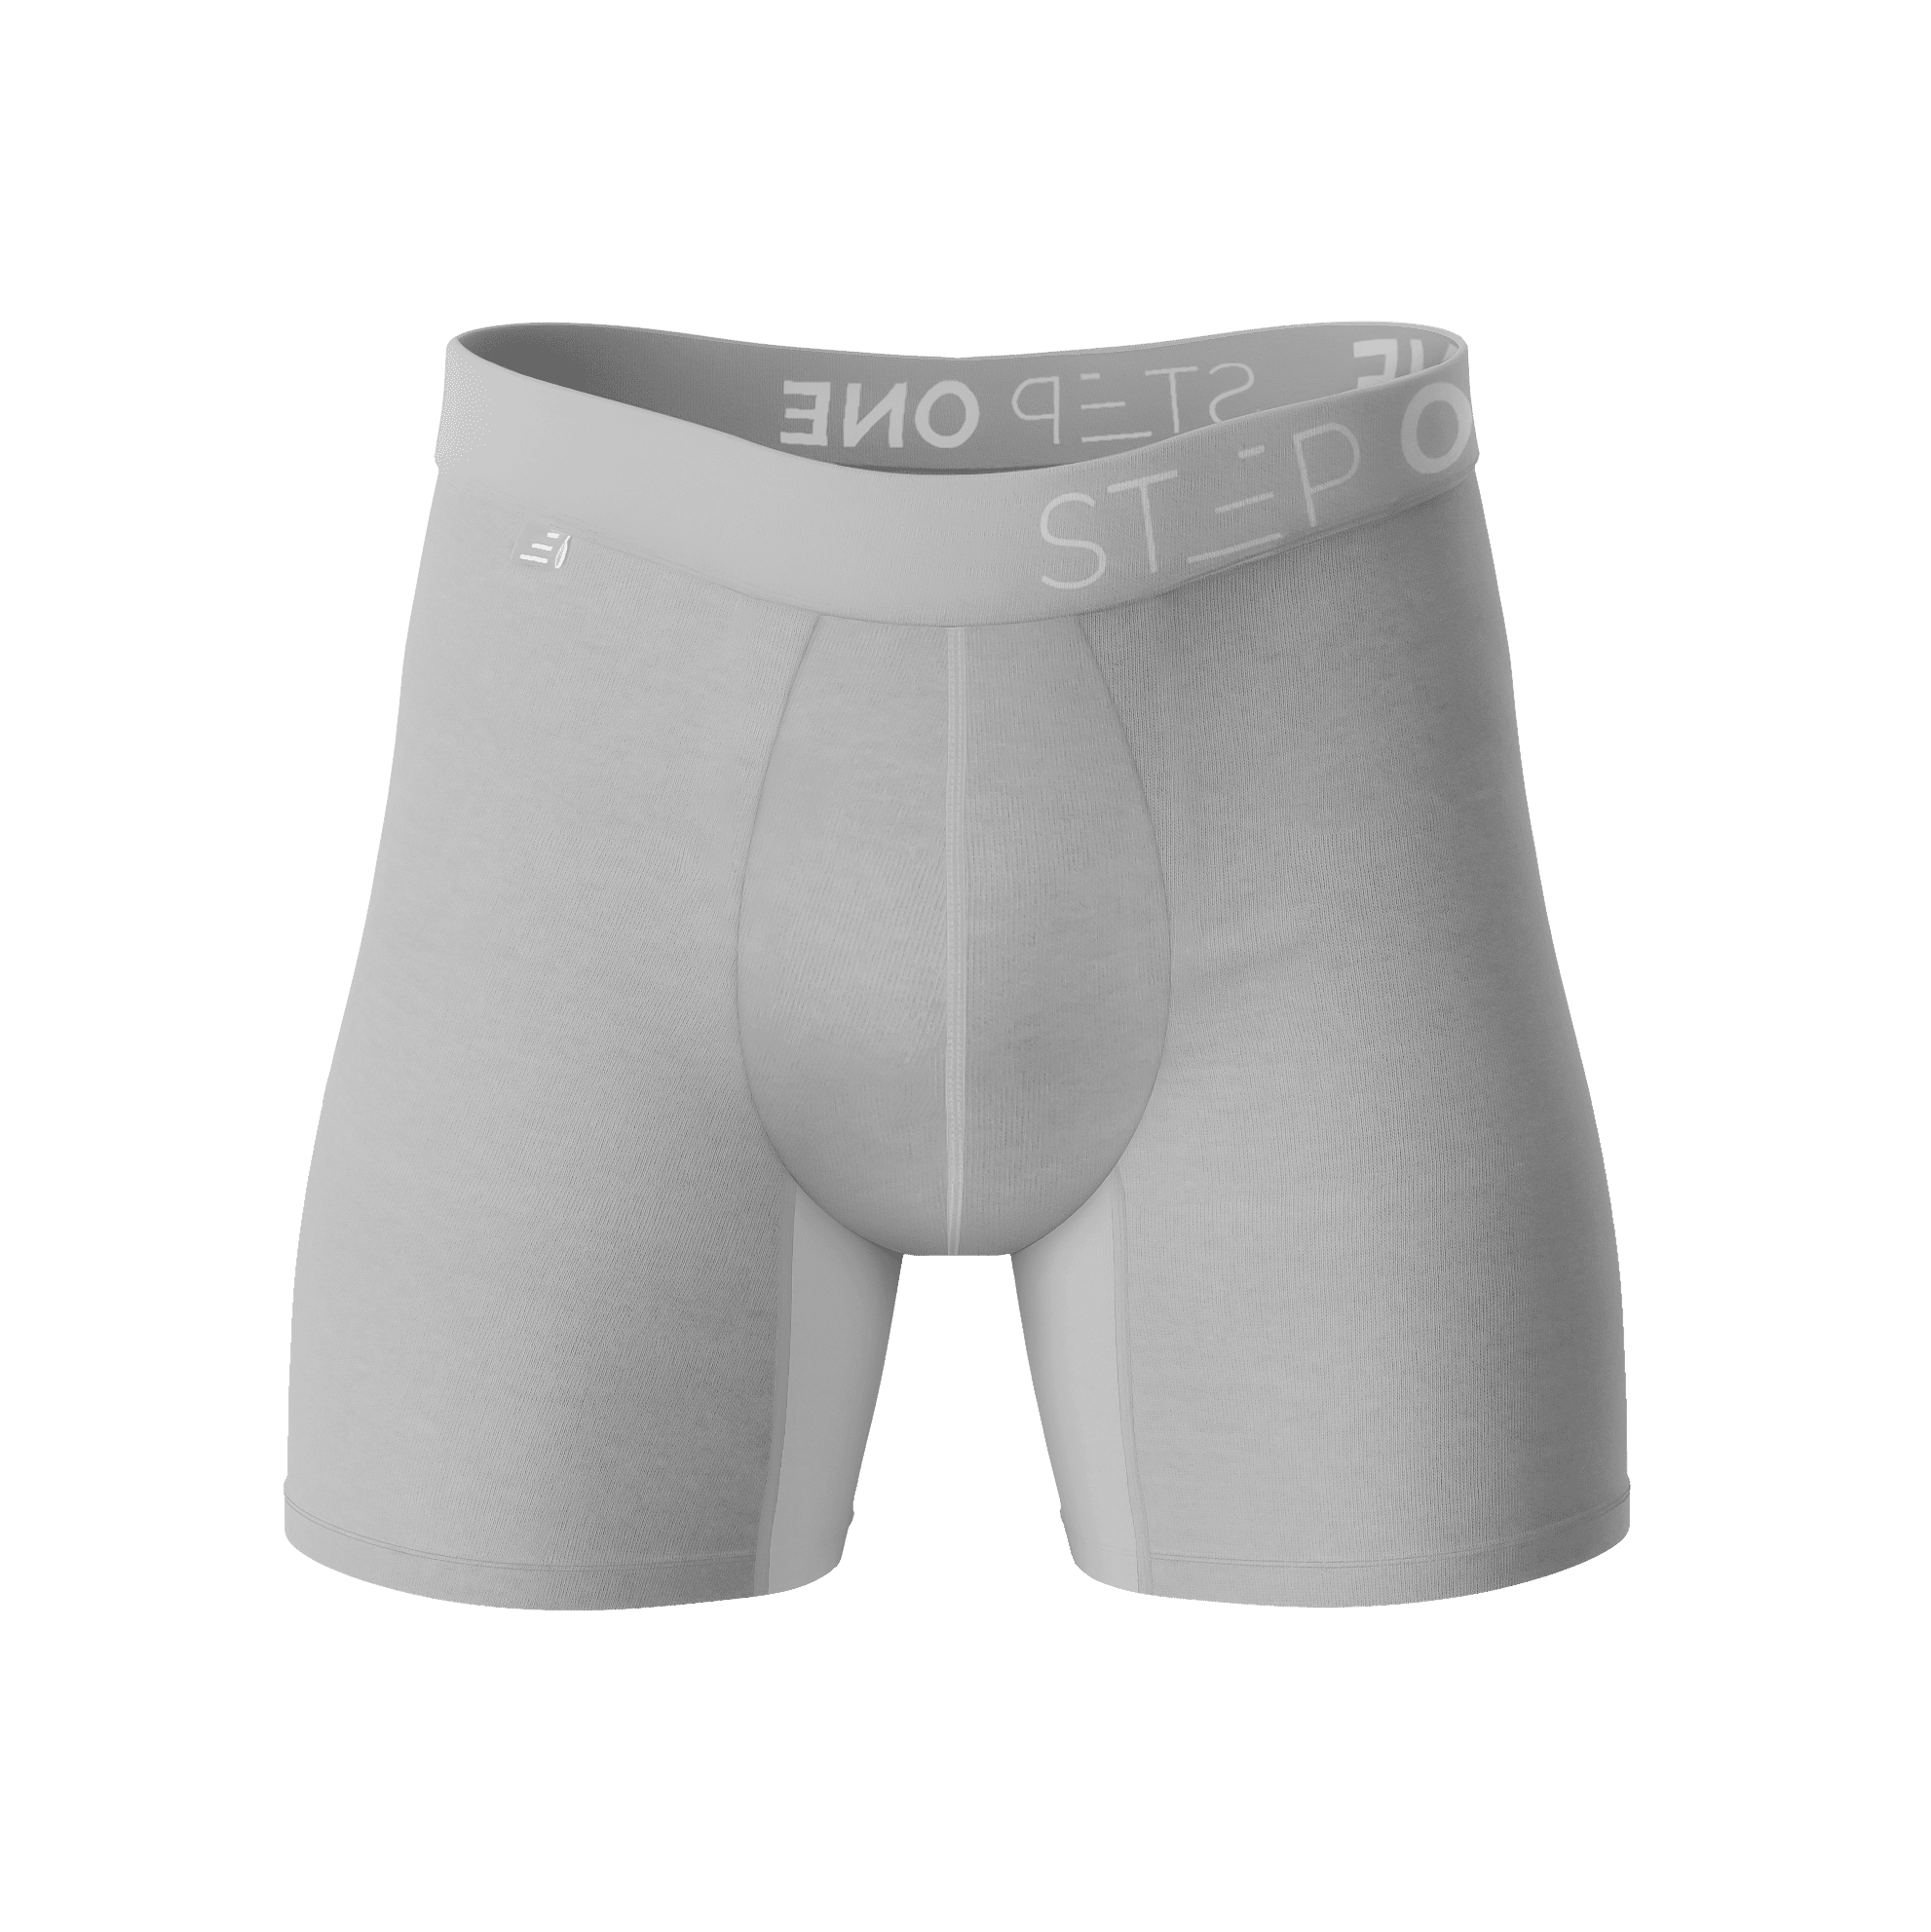 Boxer Brief - Tin Cans - View 1